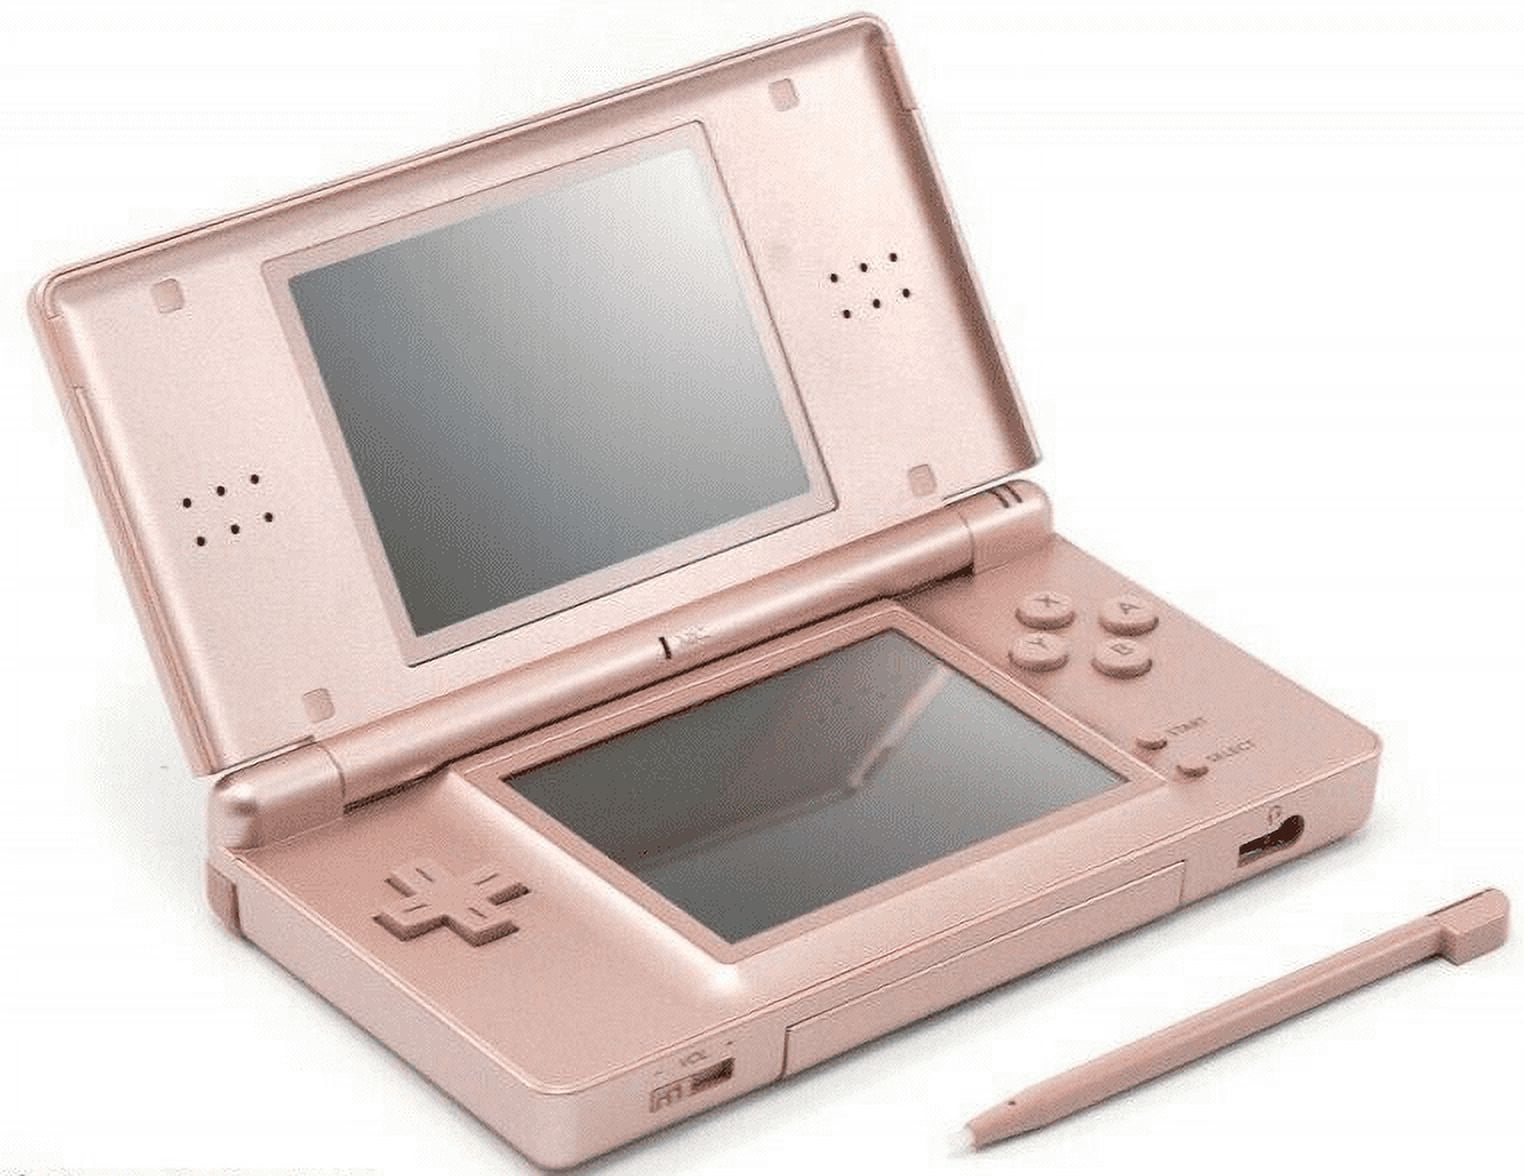 Authentic Nintendo DS Lite Console Metallic Rose with Stylus and